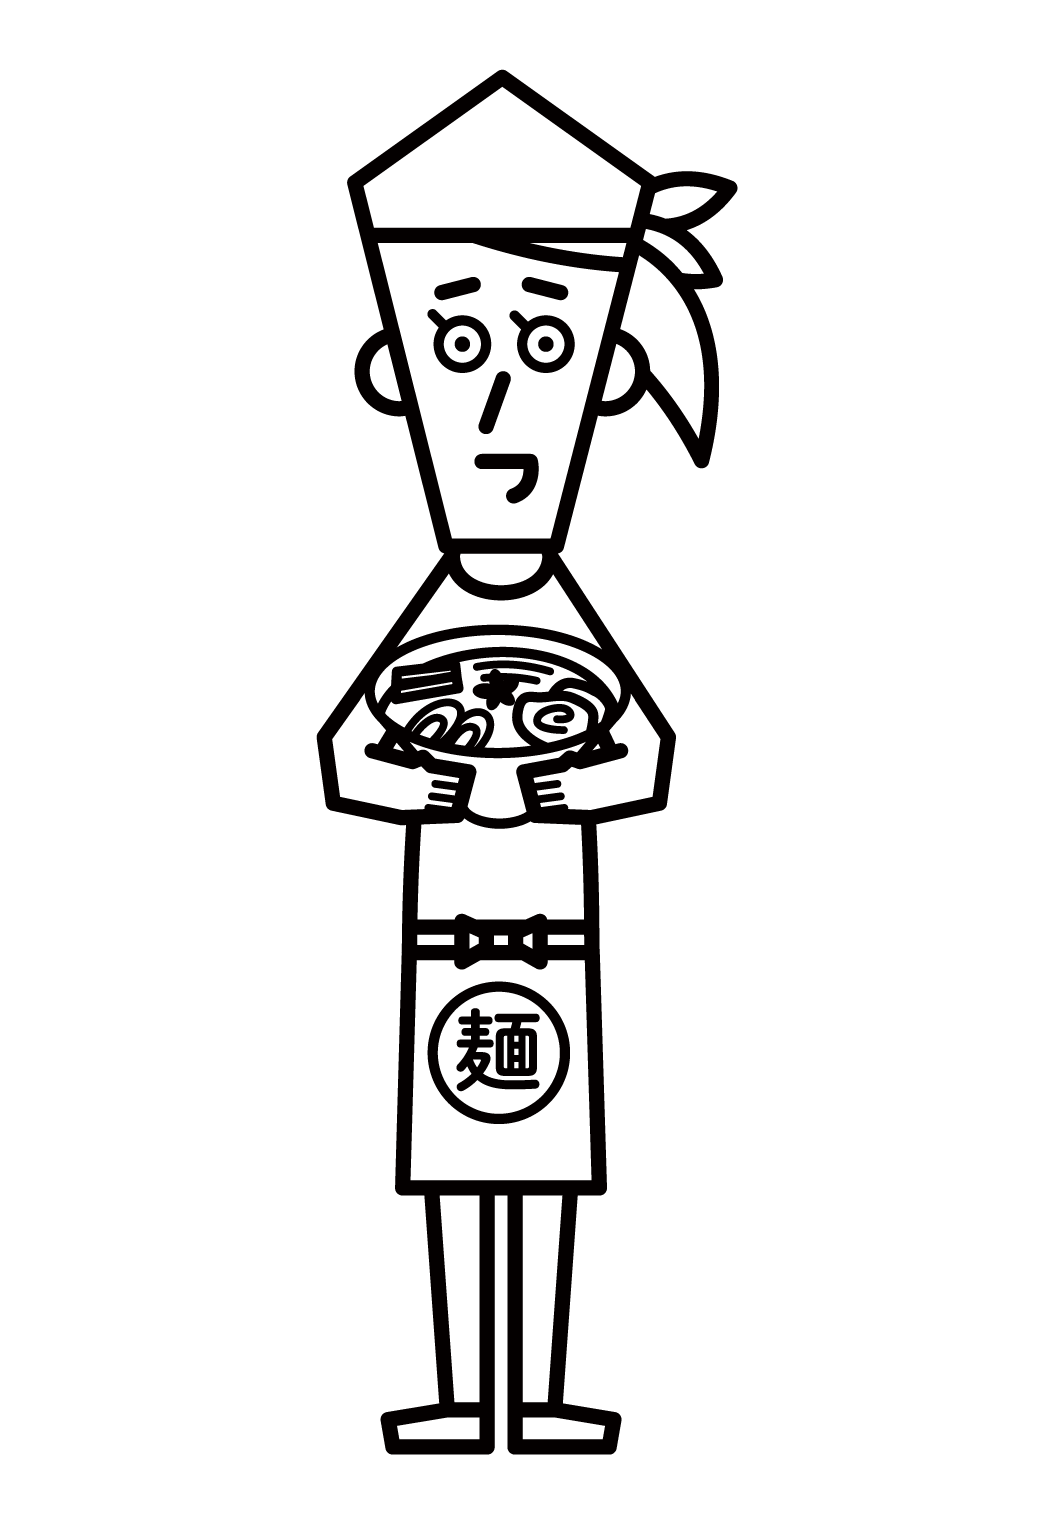 Illustration of the owner of a ramen shop (woman)